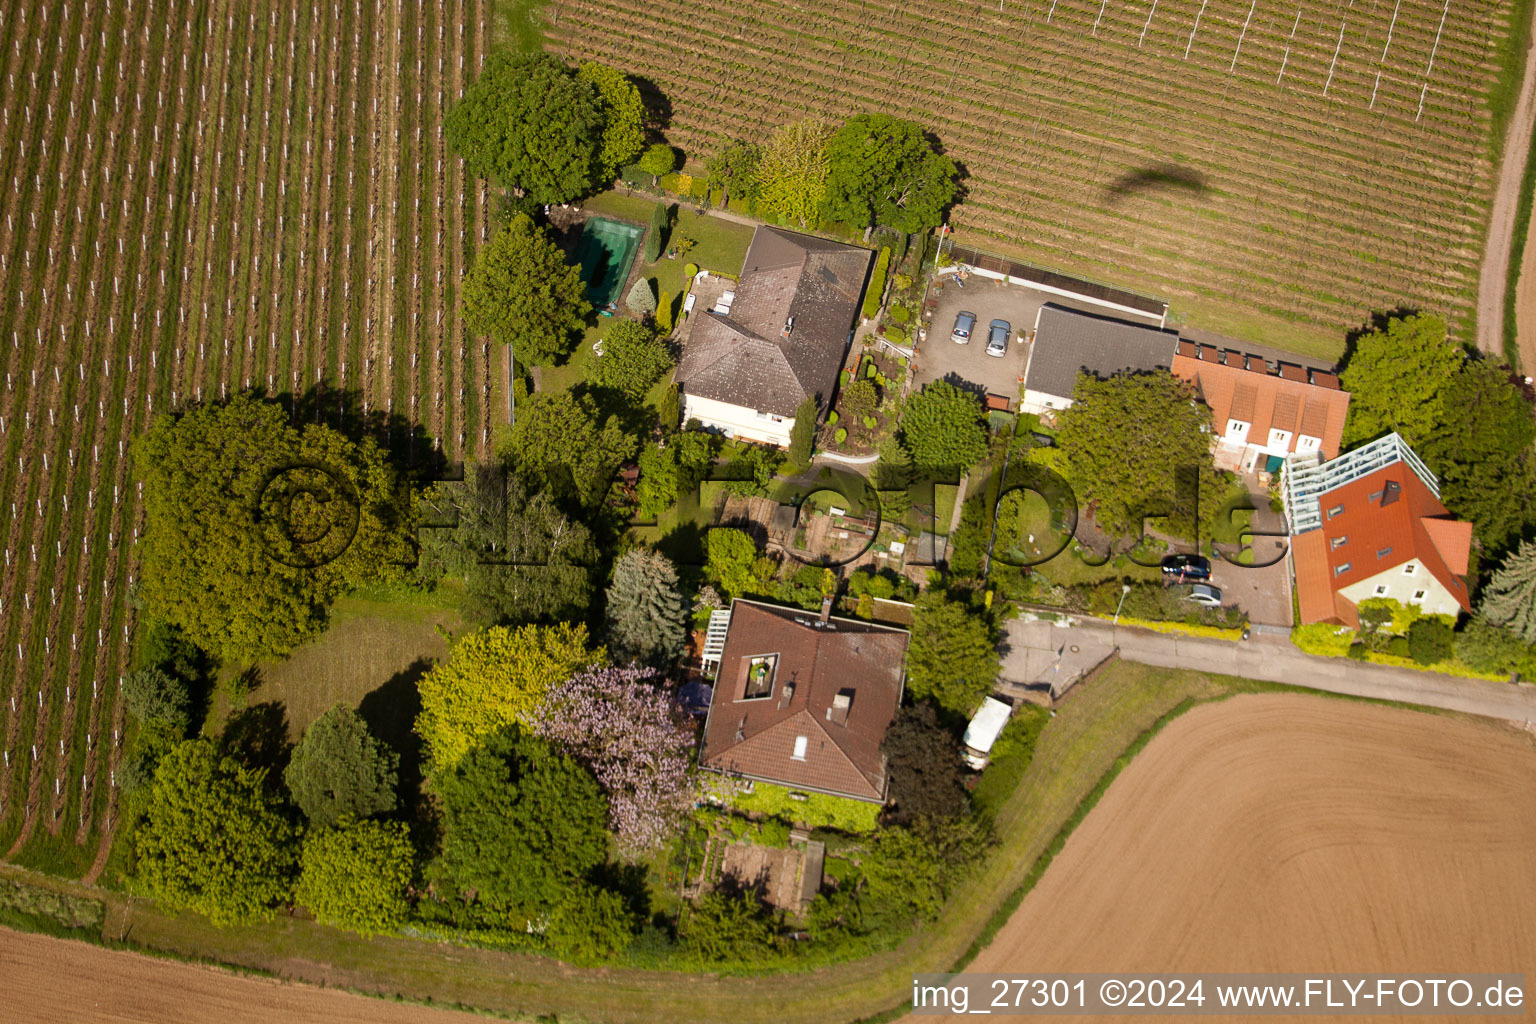 Aerial photograpy of Smallpox sentence in Landau in der Pfalz in the state Rhineland-Palatinate, Germany